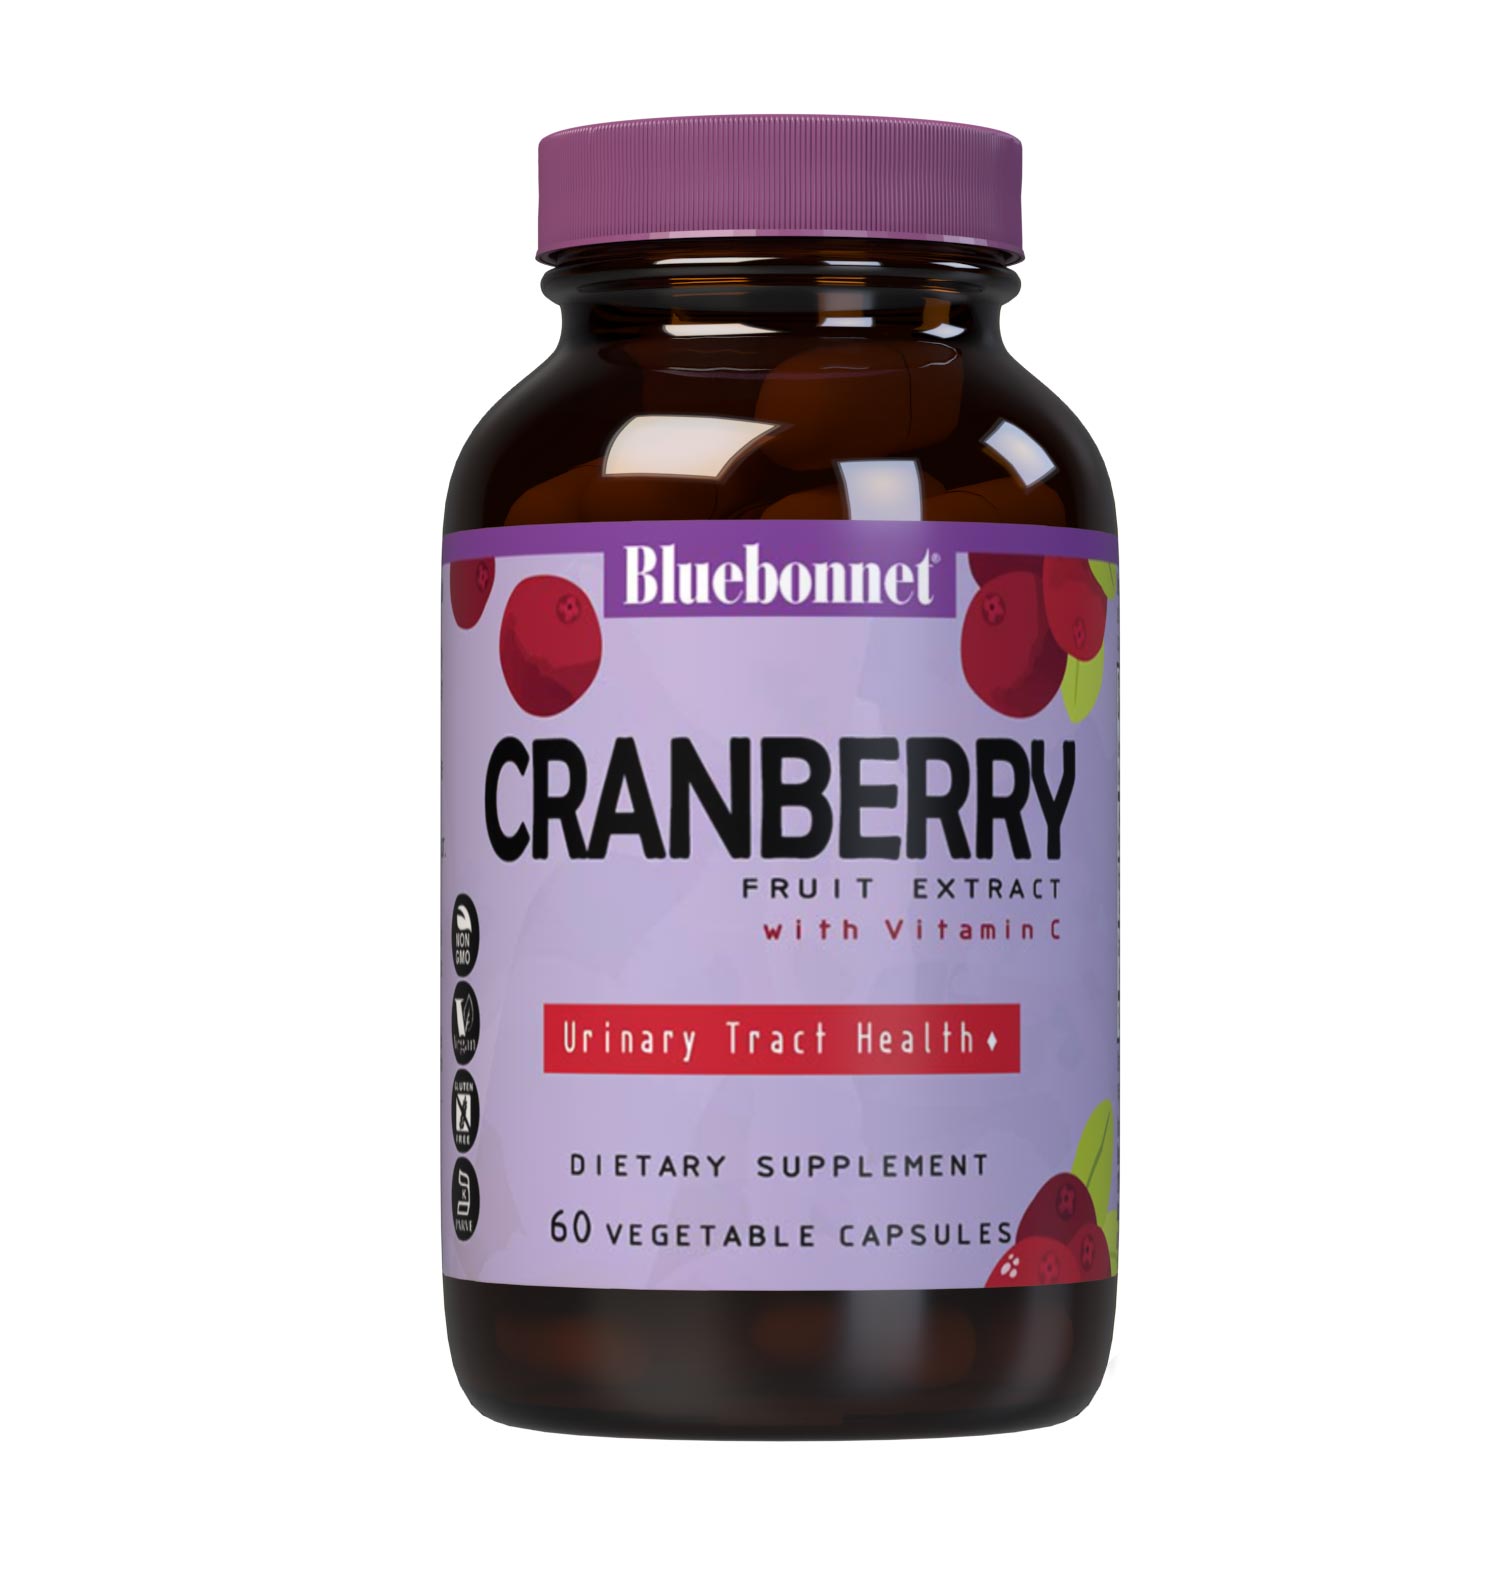 Bluebonnet’s Cranberry Fruit Extract with Vitamin C 60 Vegetable Capsules are Formulated with 500 mg of Cranberry Fruit Extract & 60 mg Identity-Preserved Vitamin C to help support urinary tract health. #size_60 count